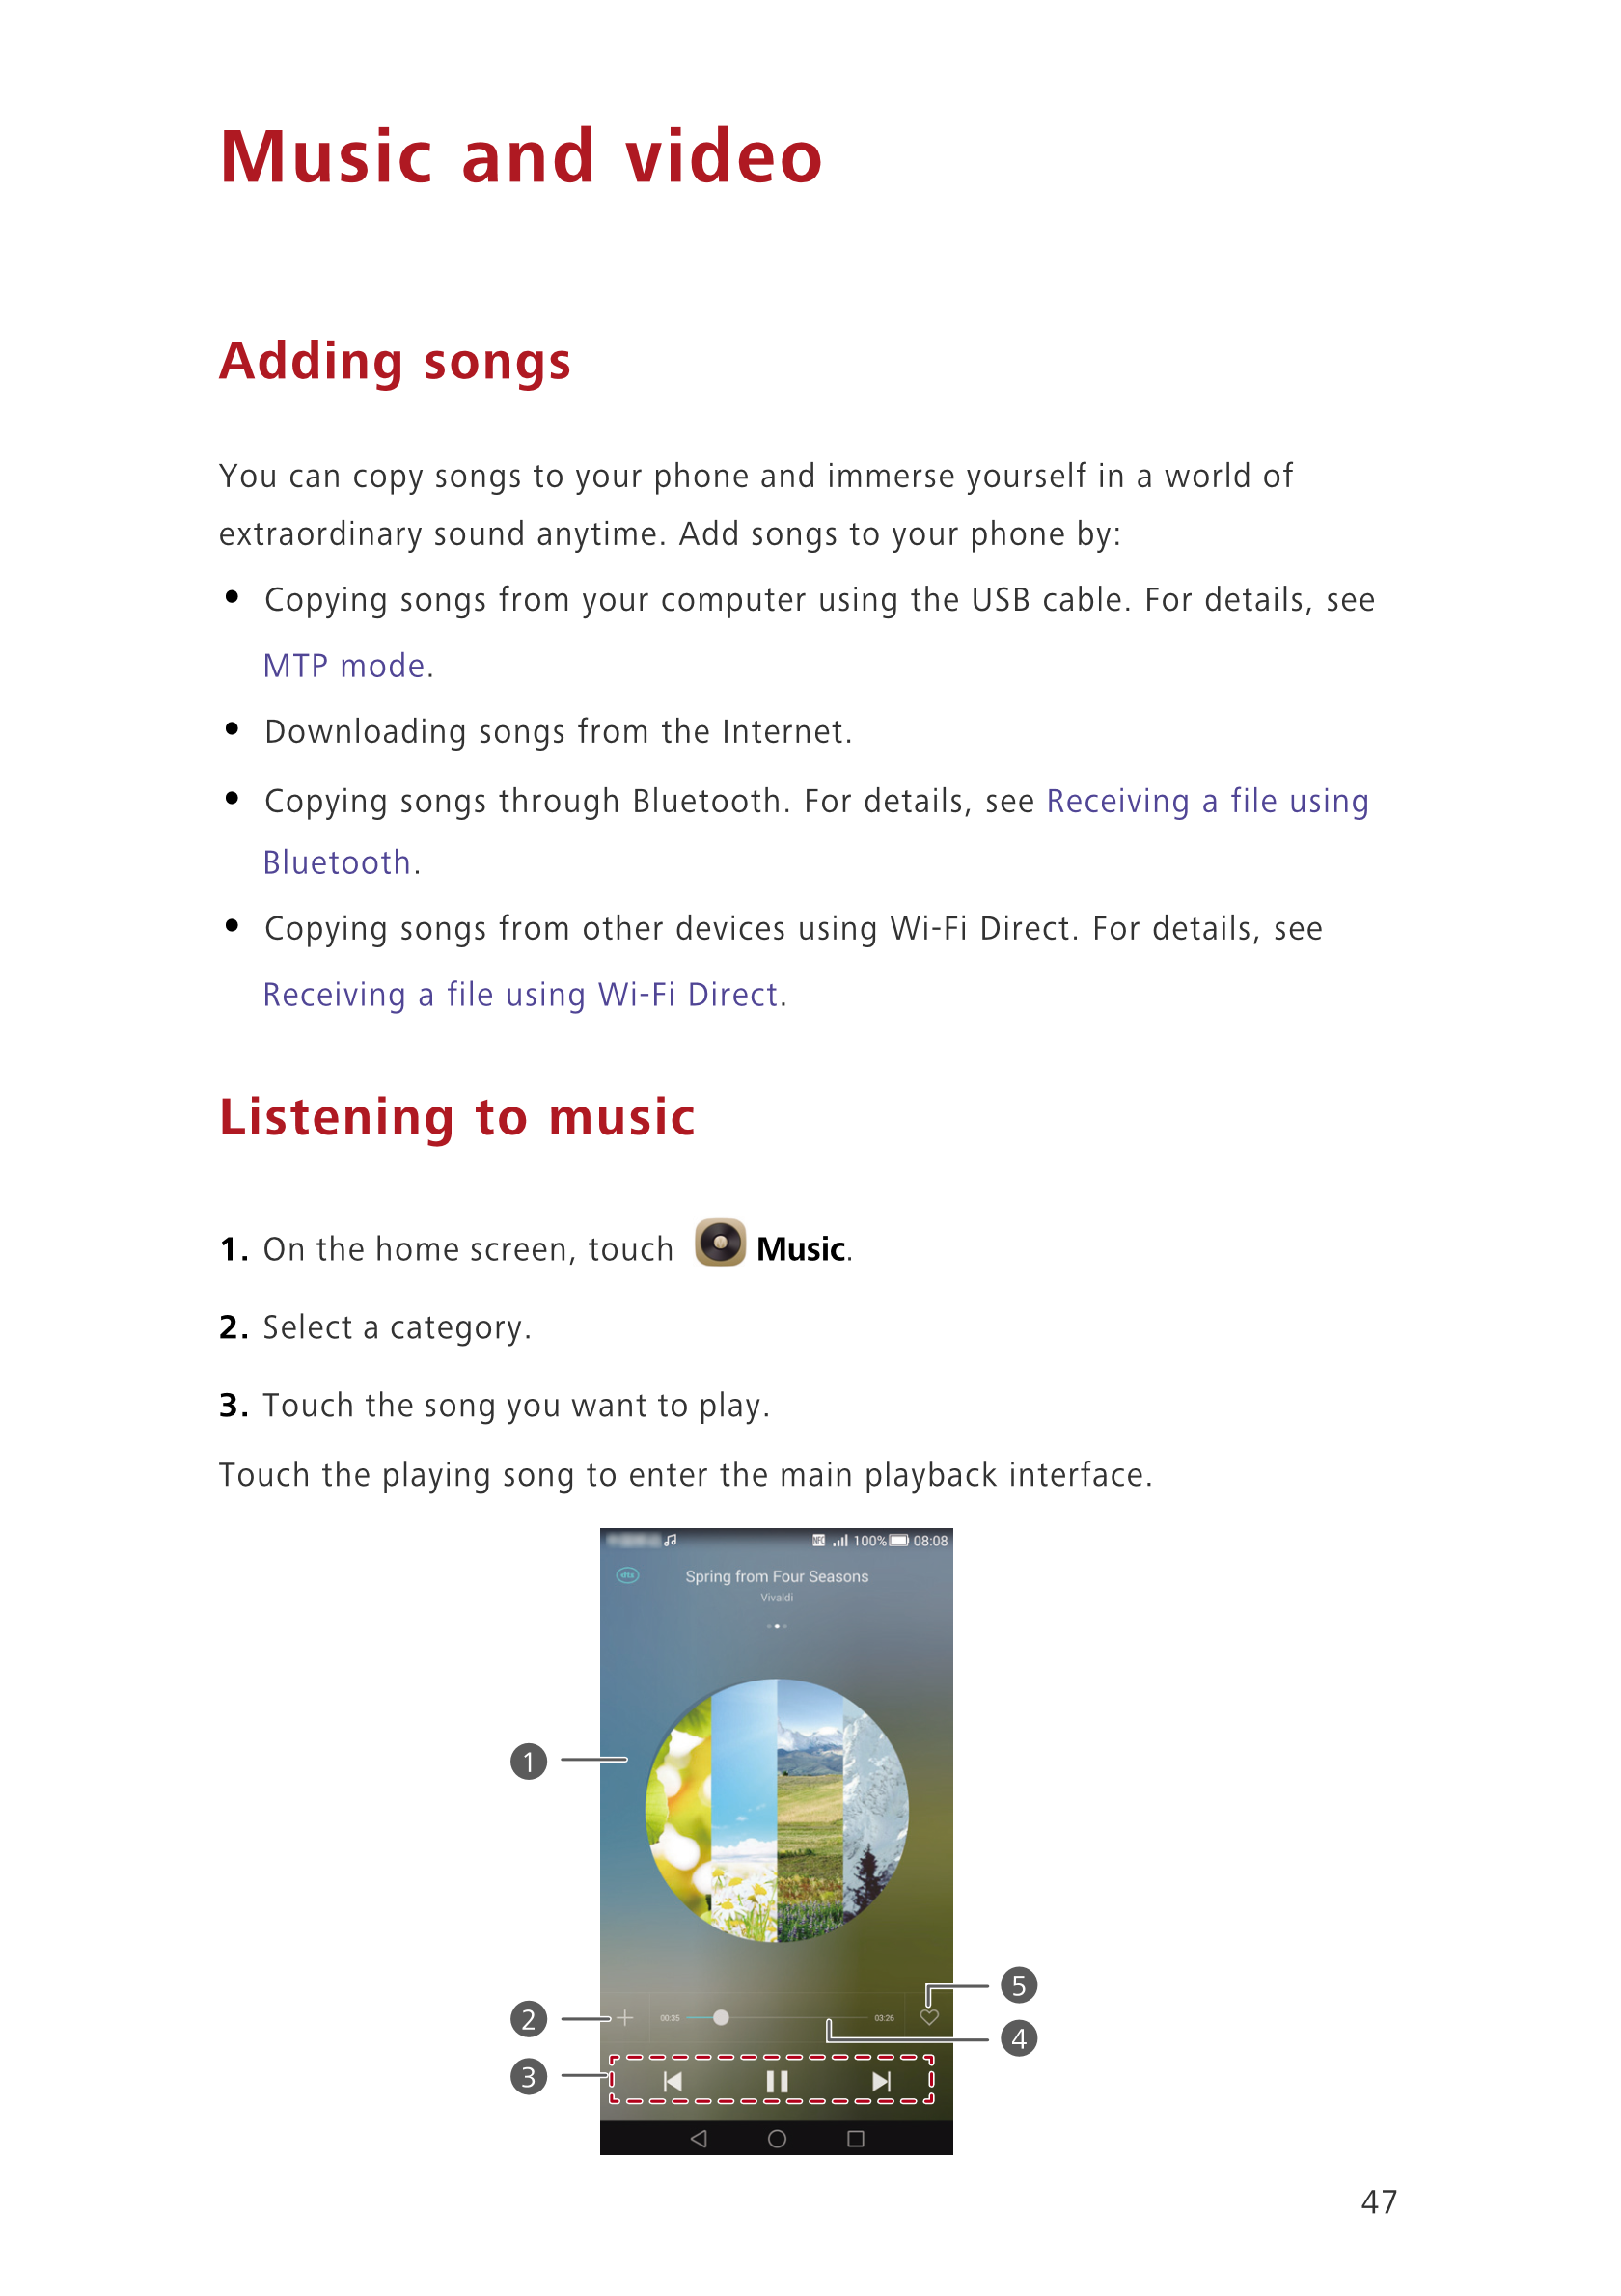 Music and video
Adding songs
You can copy songs to your phone and immerse yourself in a world of 
extraordinary sound anytime. A